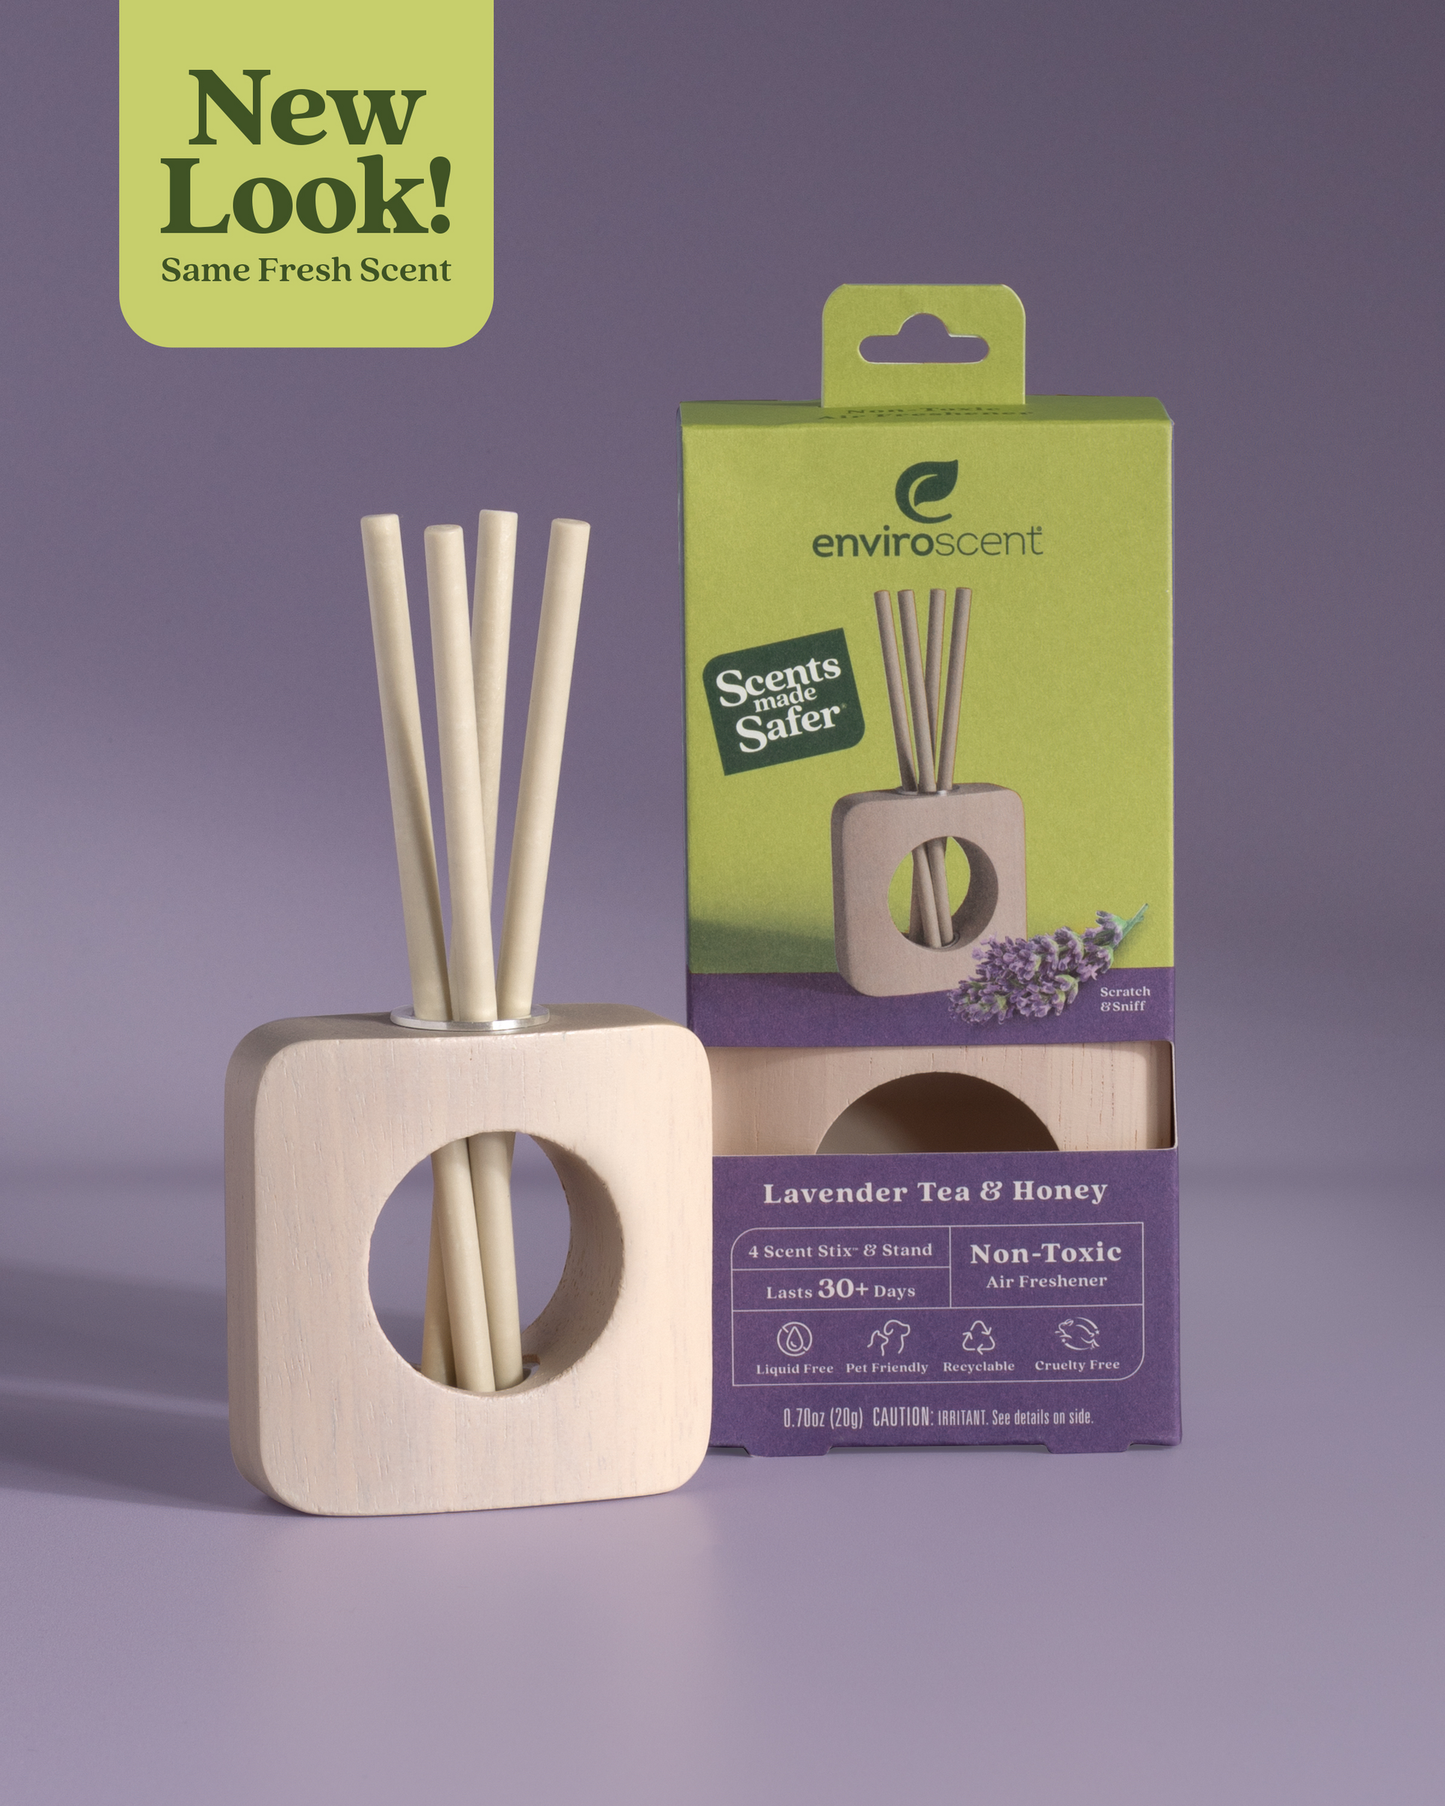 Lavender Tea + Honey Scent Stix + Stand Starter Kit in and out of packaging